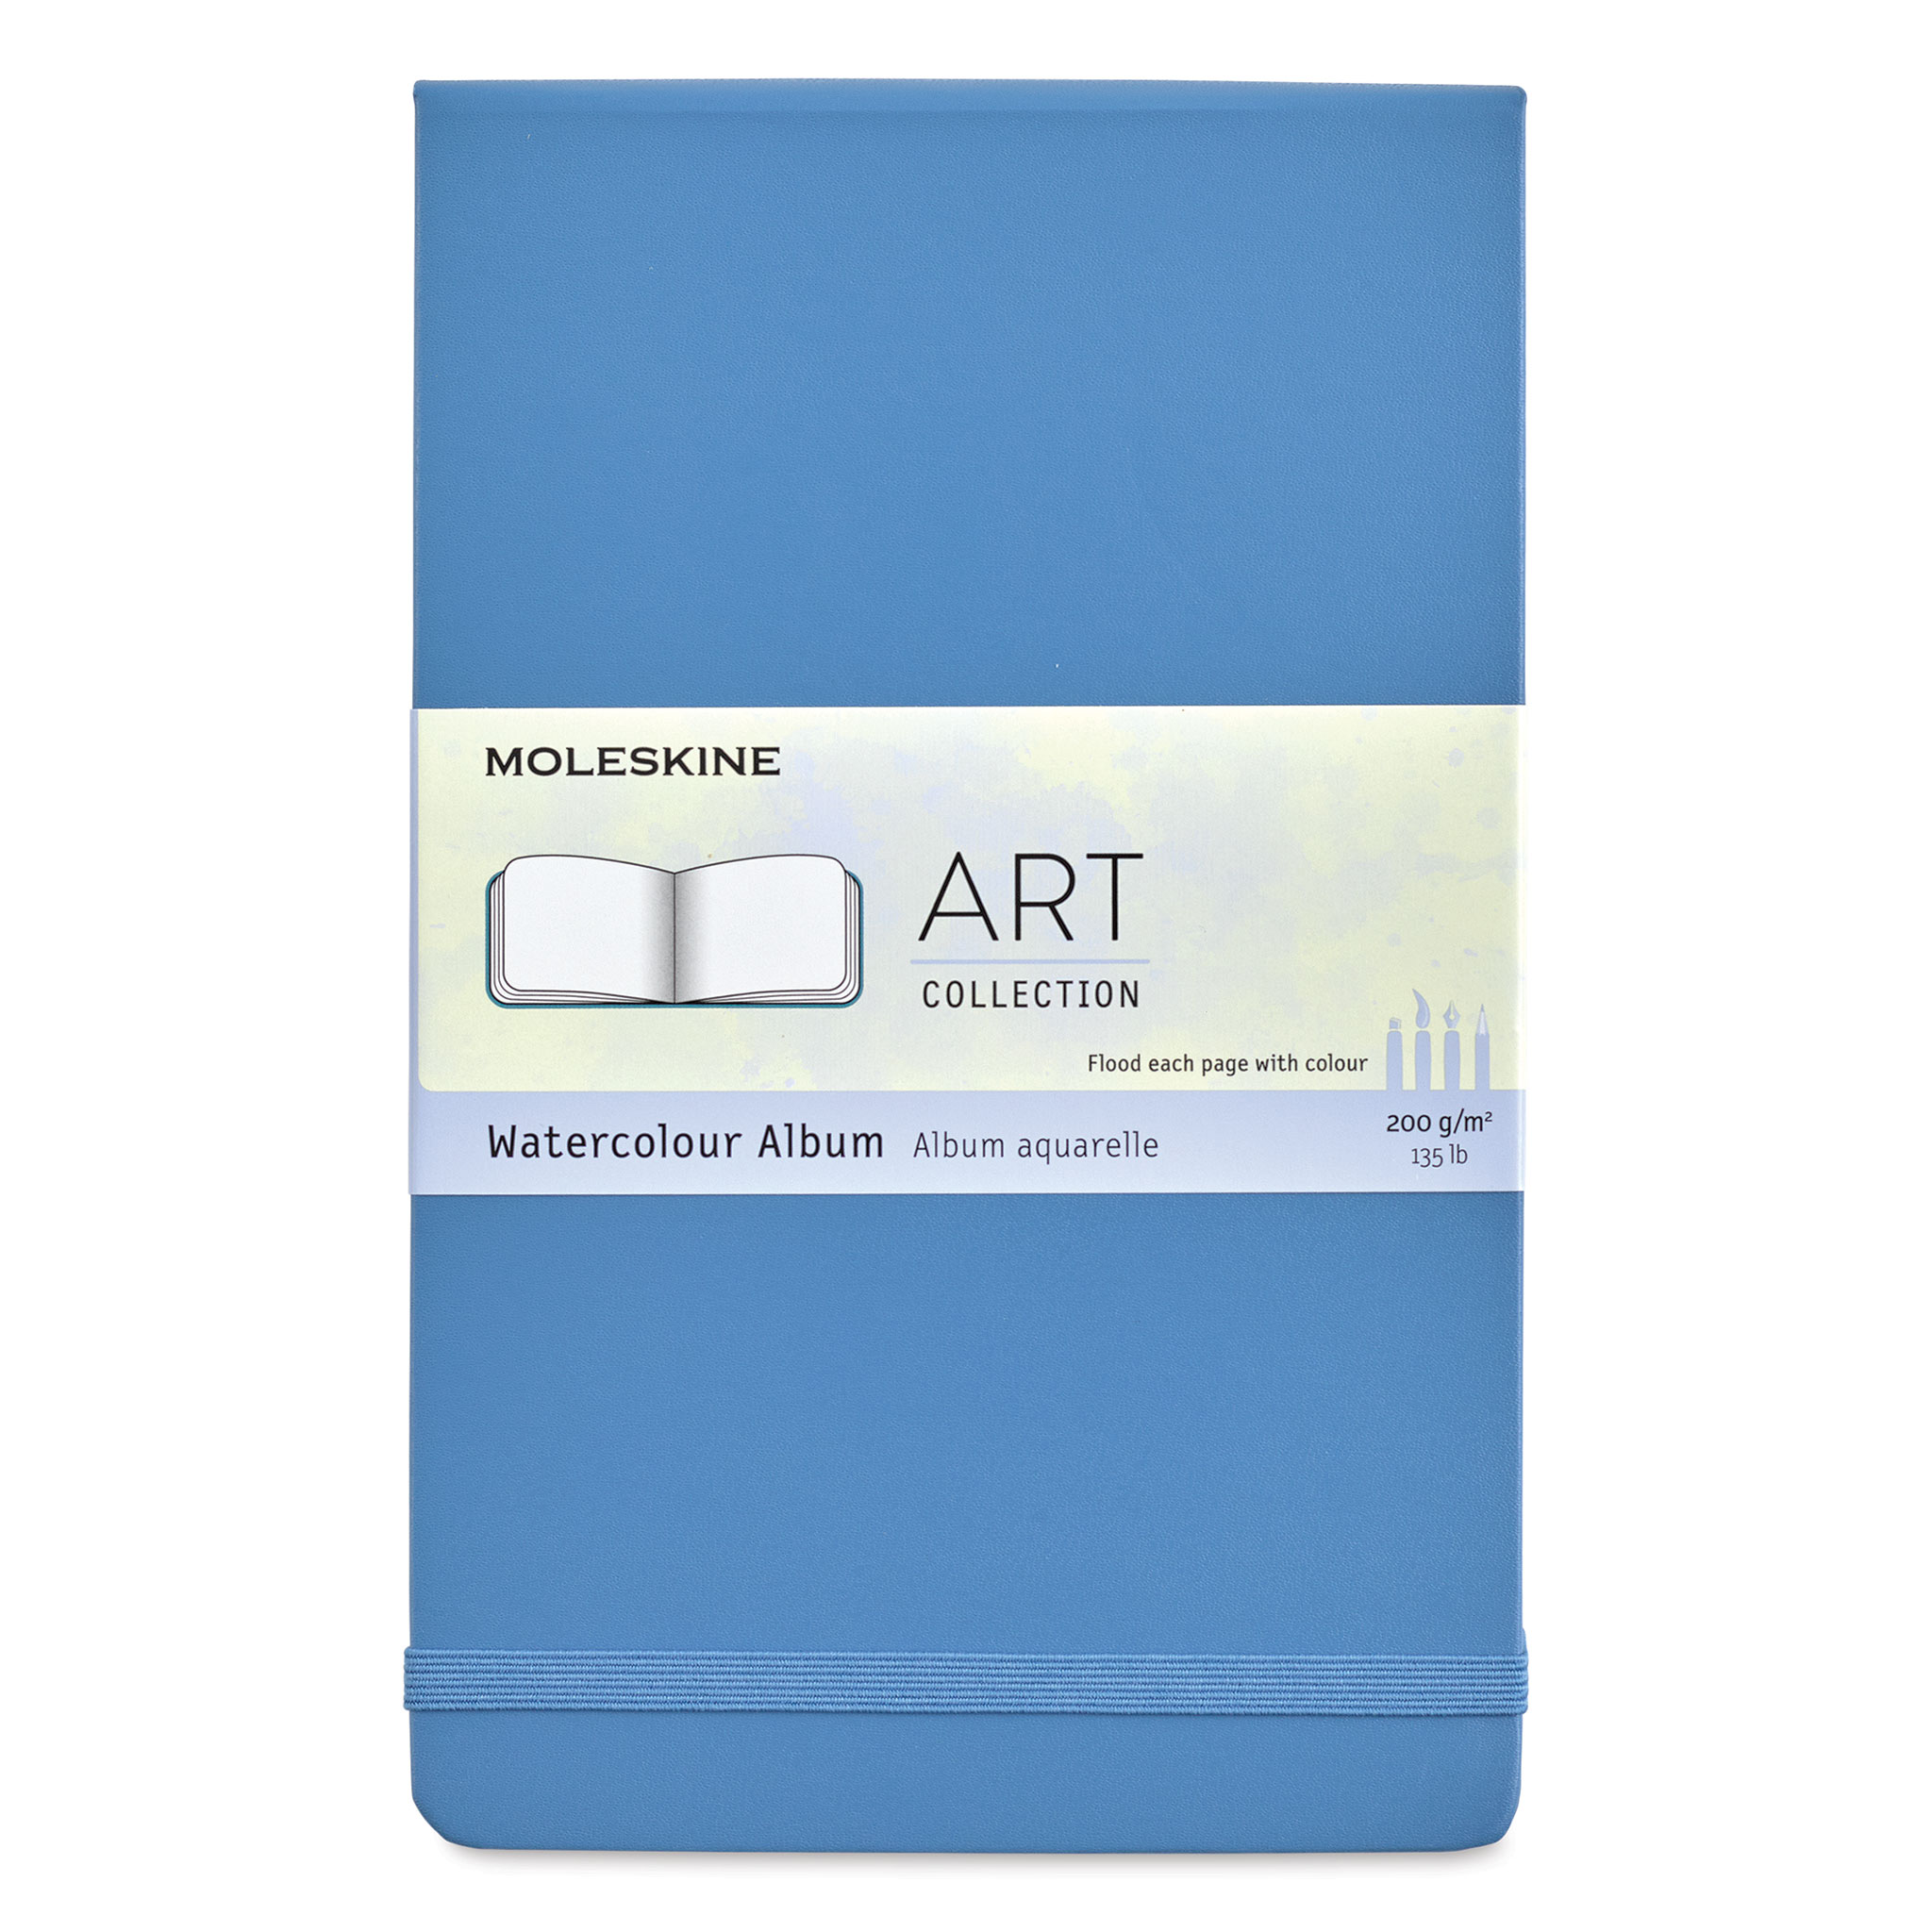 Moleskine Art Plus Sketchbook A4 Review  Illustrations, Sketches, and Art  Supply Reviews